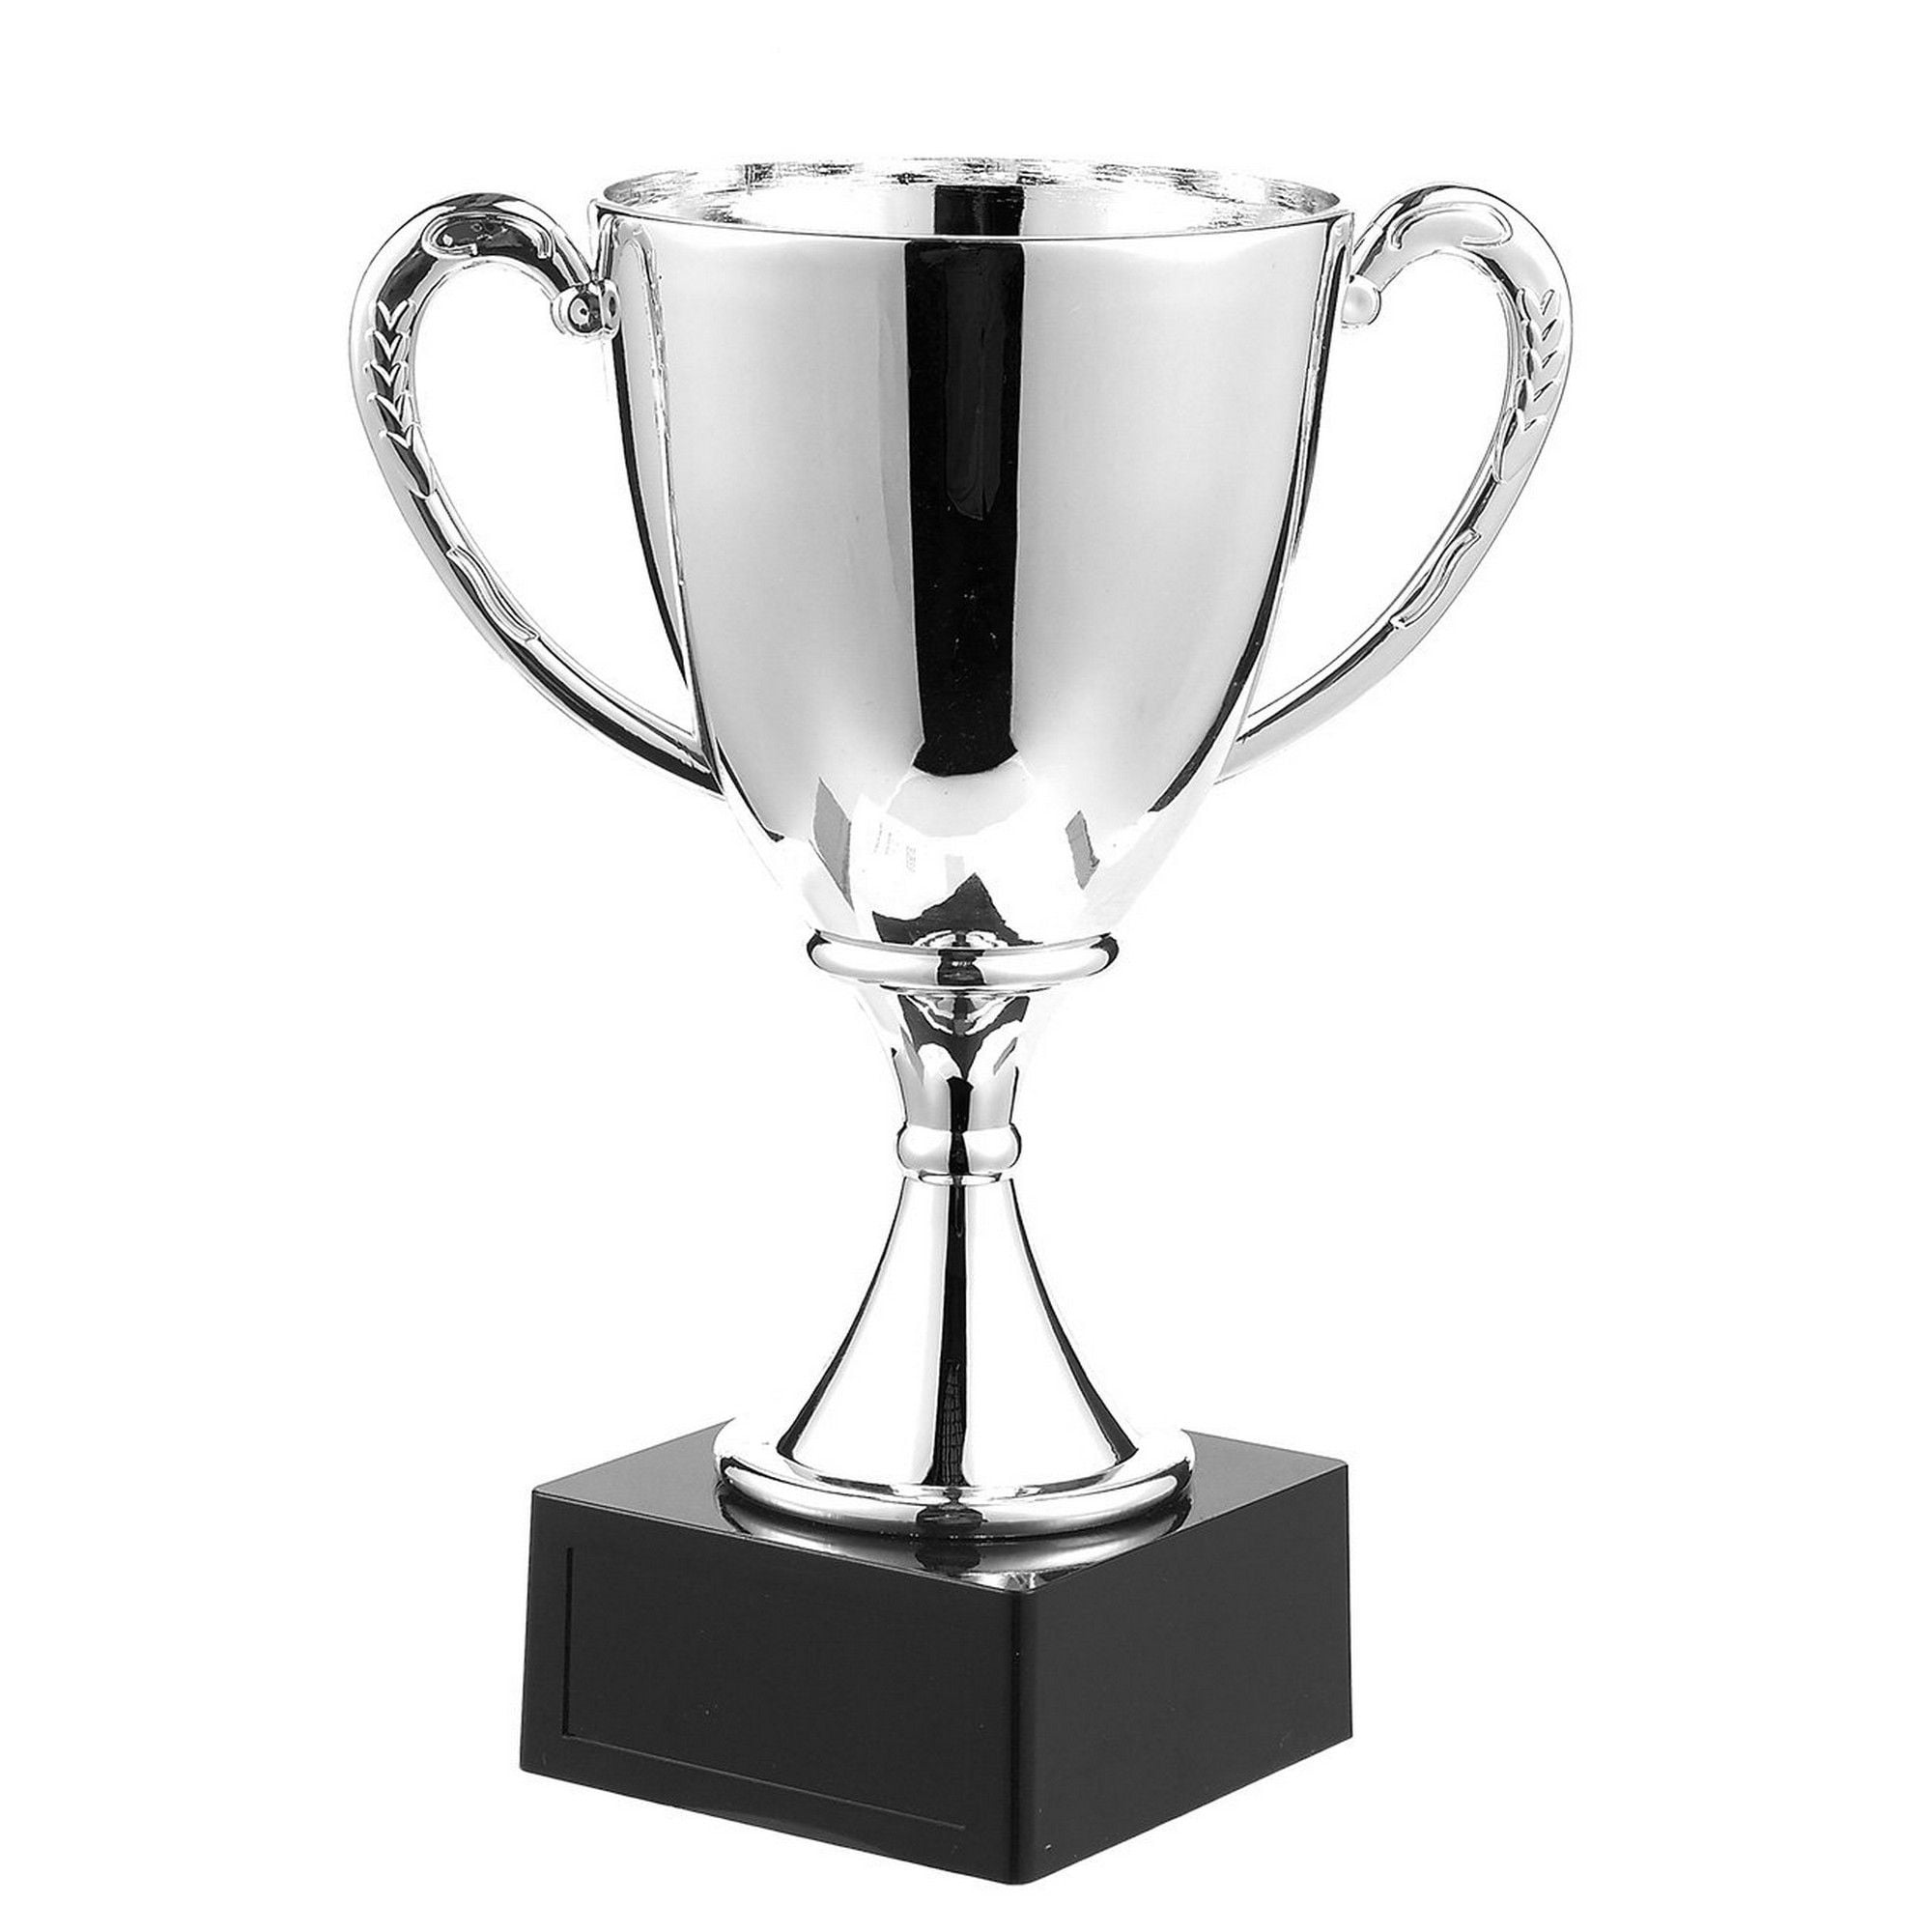 Award Trophy Silver Trophy Cup For Sports Tournaments Competitions 6 3 X 8 X 4 Inches Walmart Com